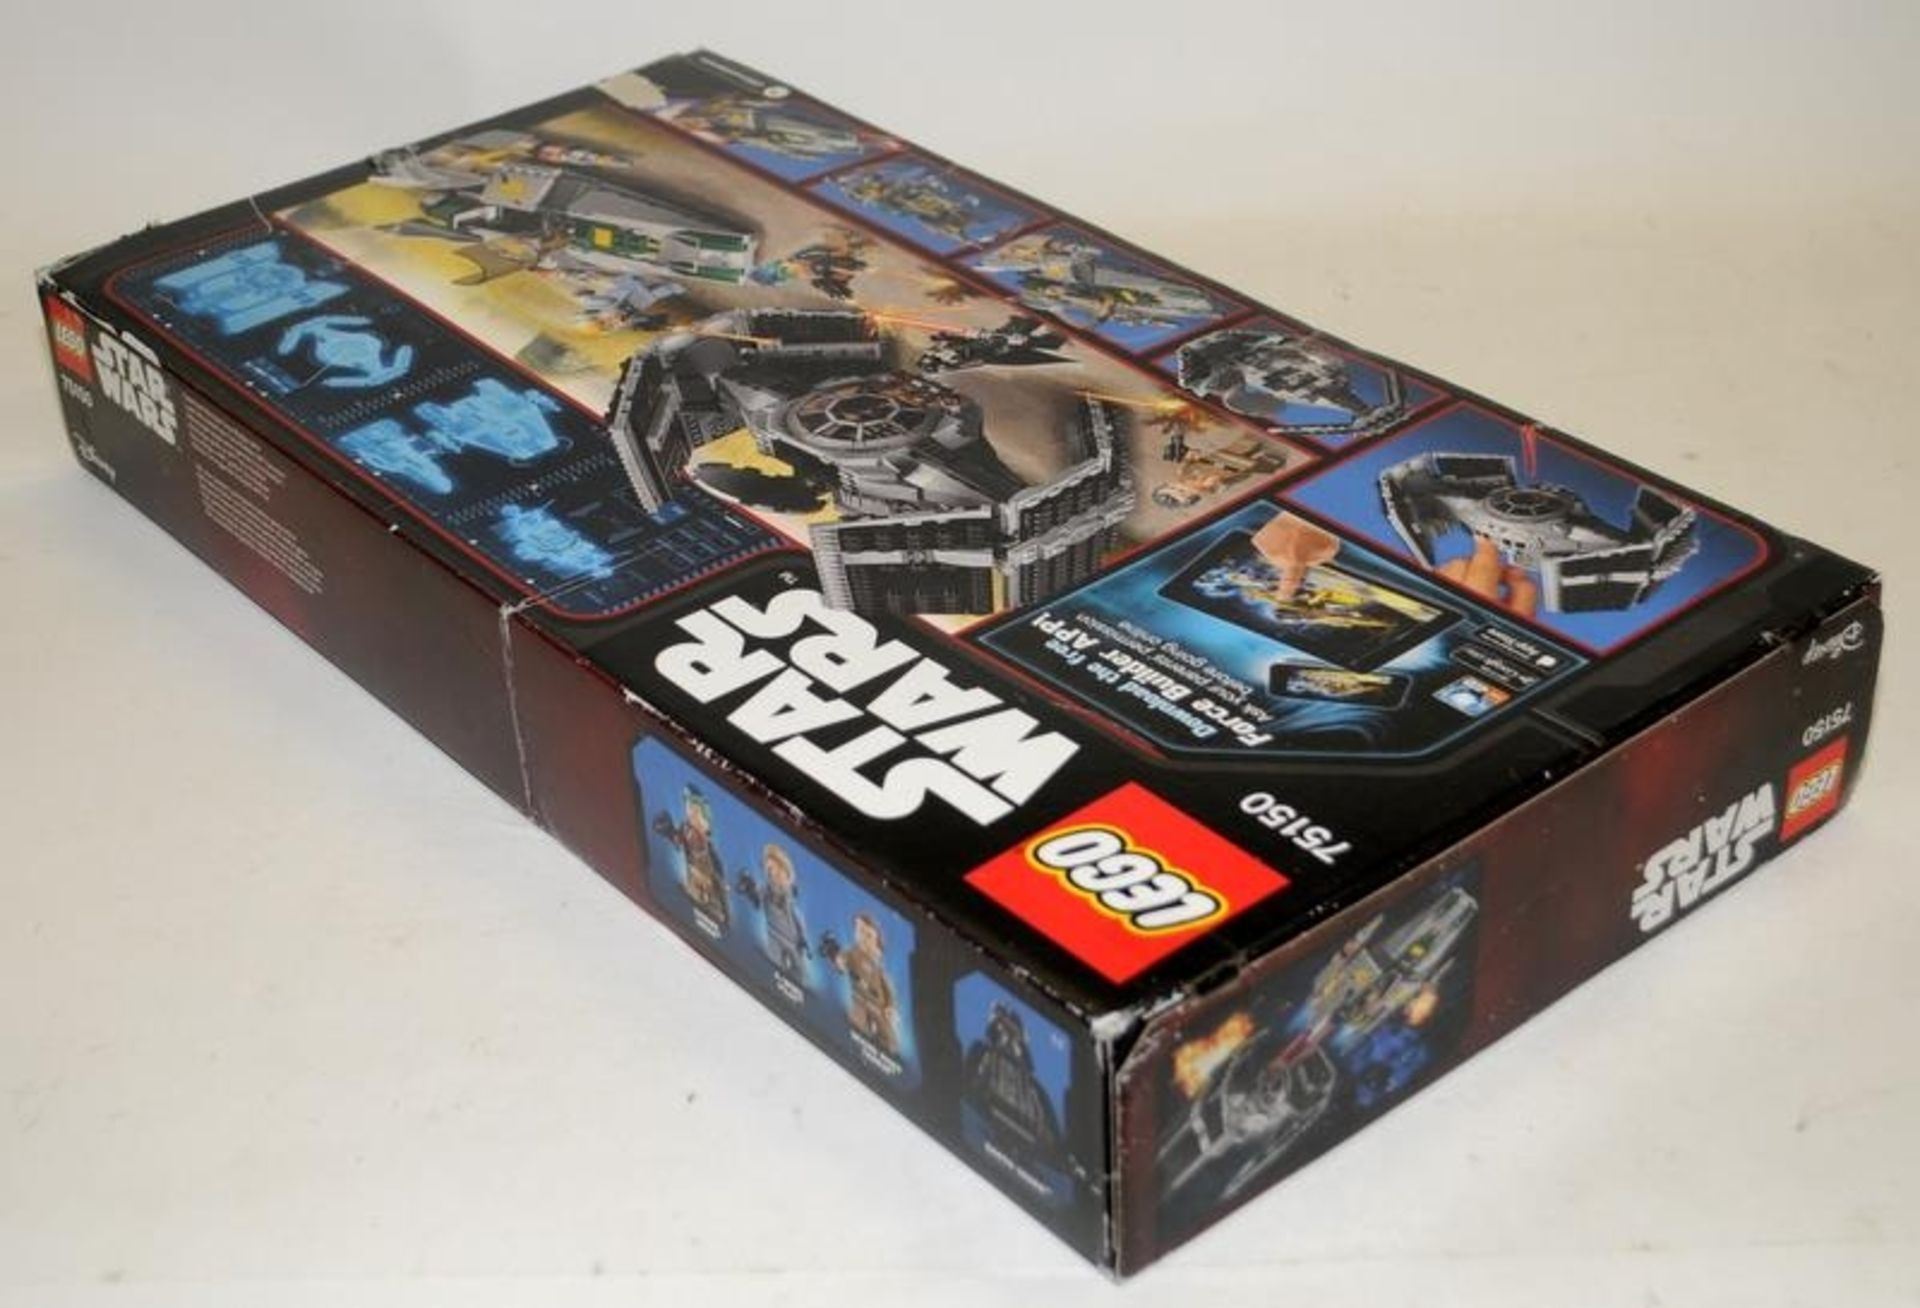 Star Wars Lego: Vader's TIE Advanced vs. A-Wing Starfighter. Model boxed and complete but missing - Image 2 of 2